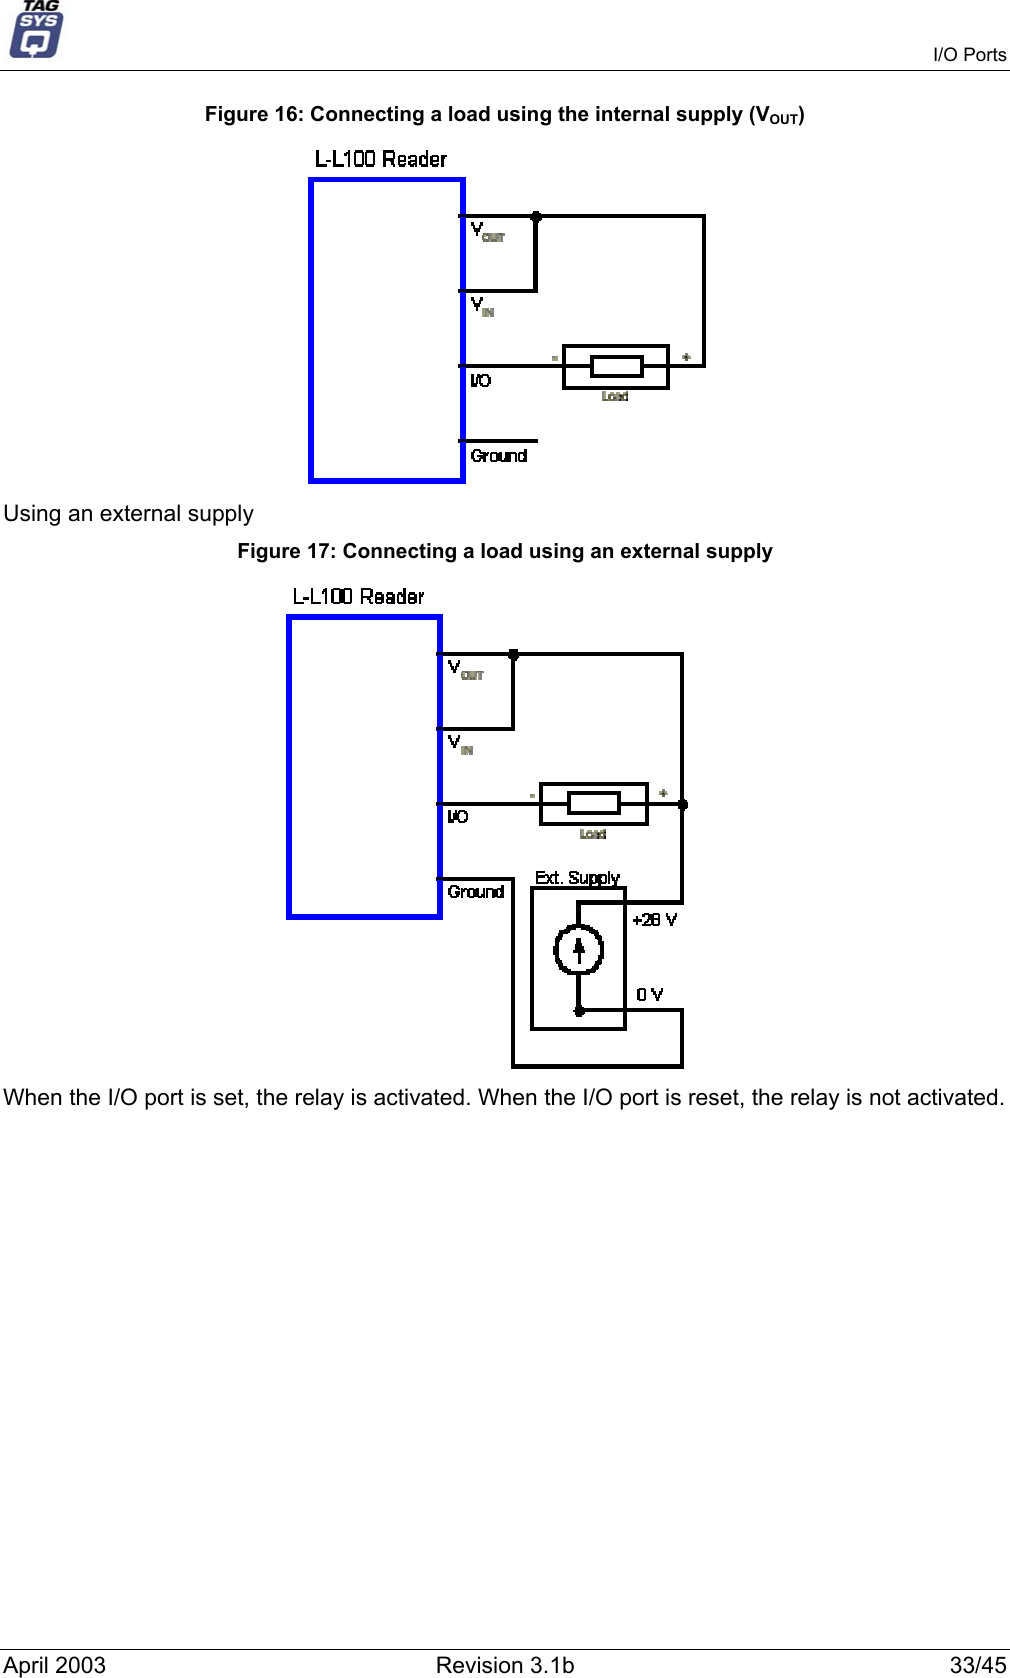   I/O Ports Figure 16: Connecting a load using the internal supply (VOUT)  Using an external supply  Figure 17: Connecting a load using an external supply  When the I/O port is set, the relay is activated. When the I/O port is reset, the relay is not activated. April 2003  Revision 3.1b  33/45 